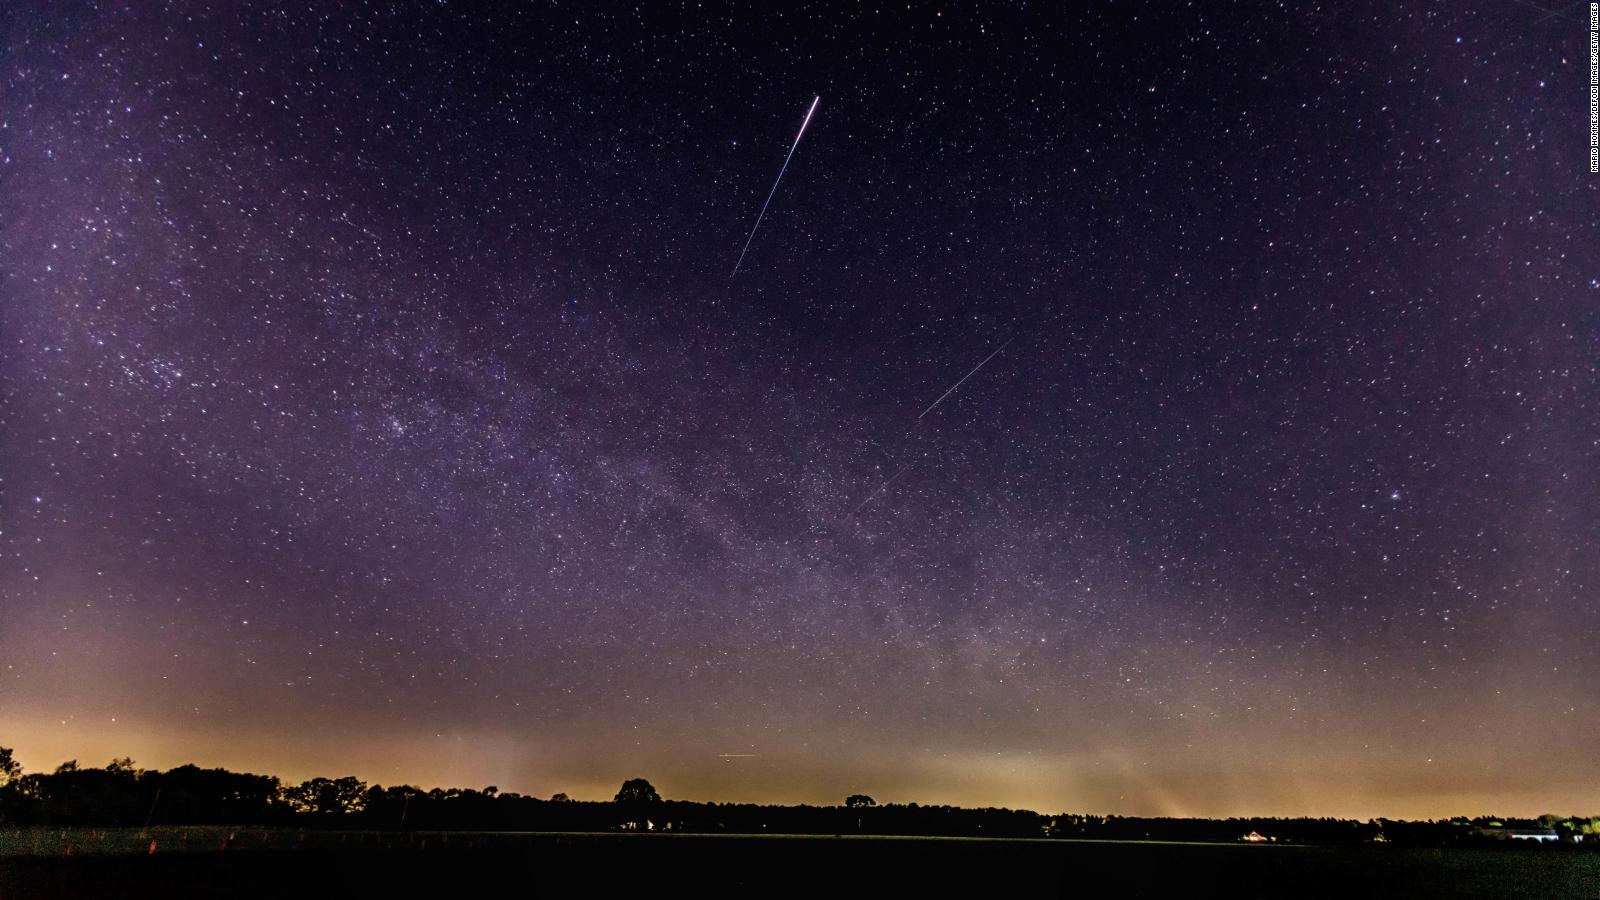 Lyrid meteor shower peaks predwan April 22. Here's how to watch the